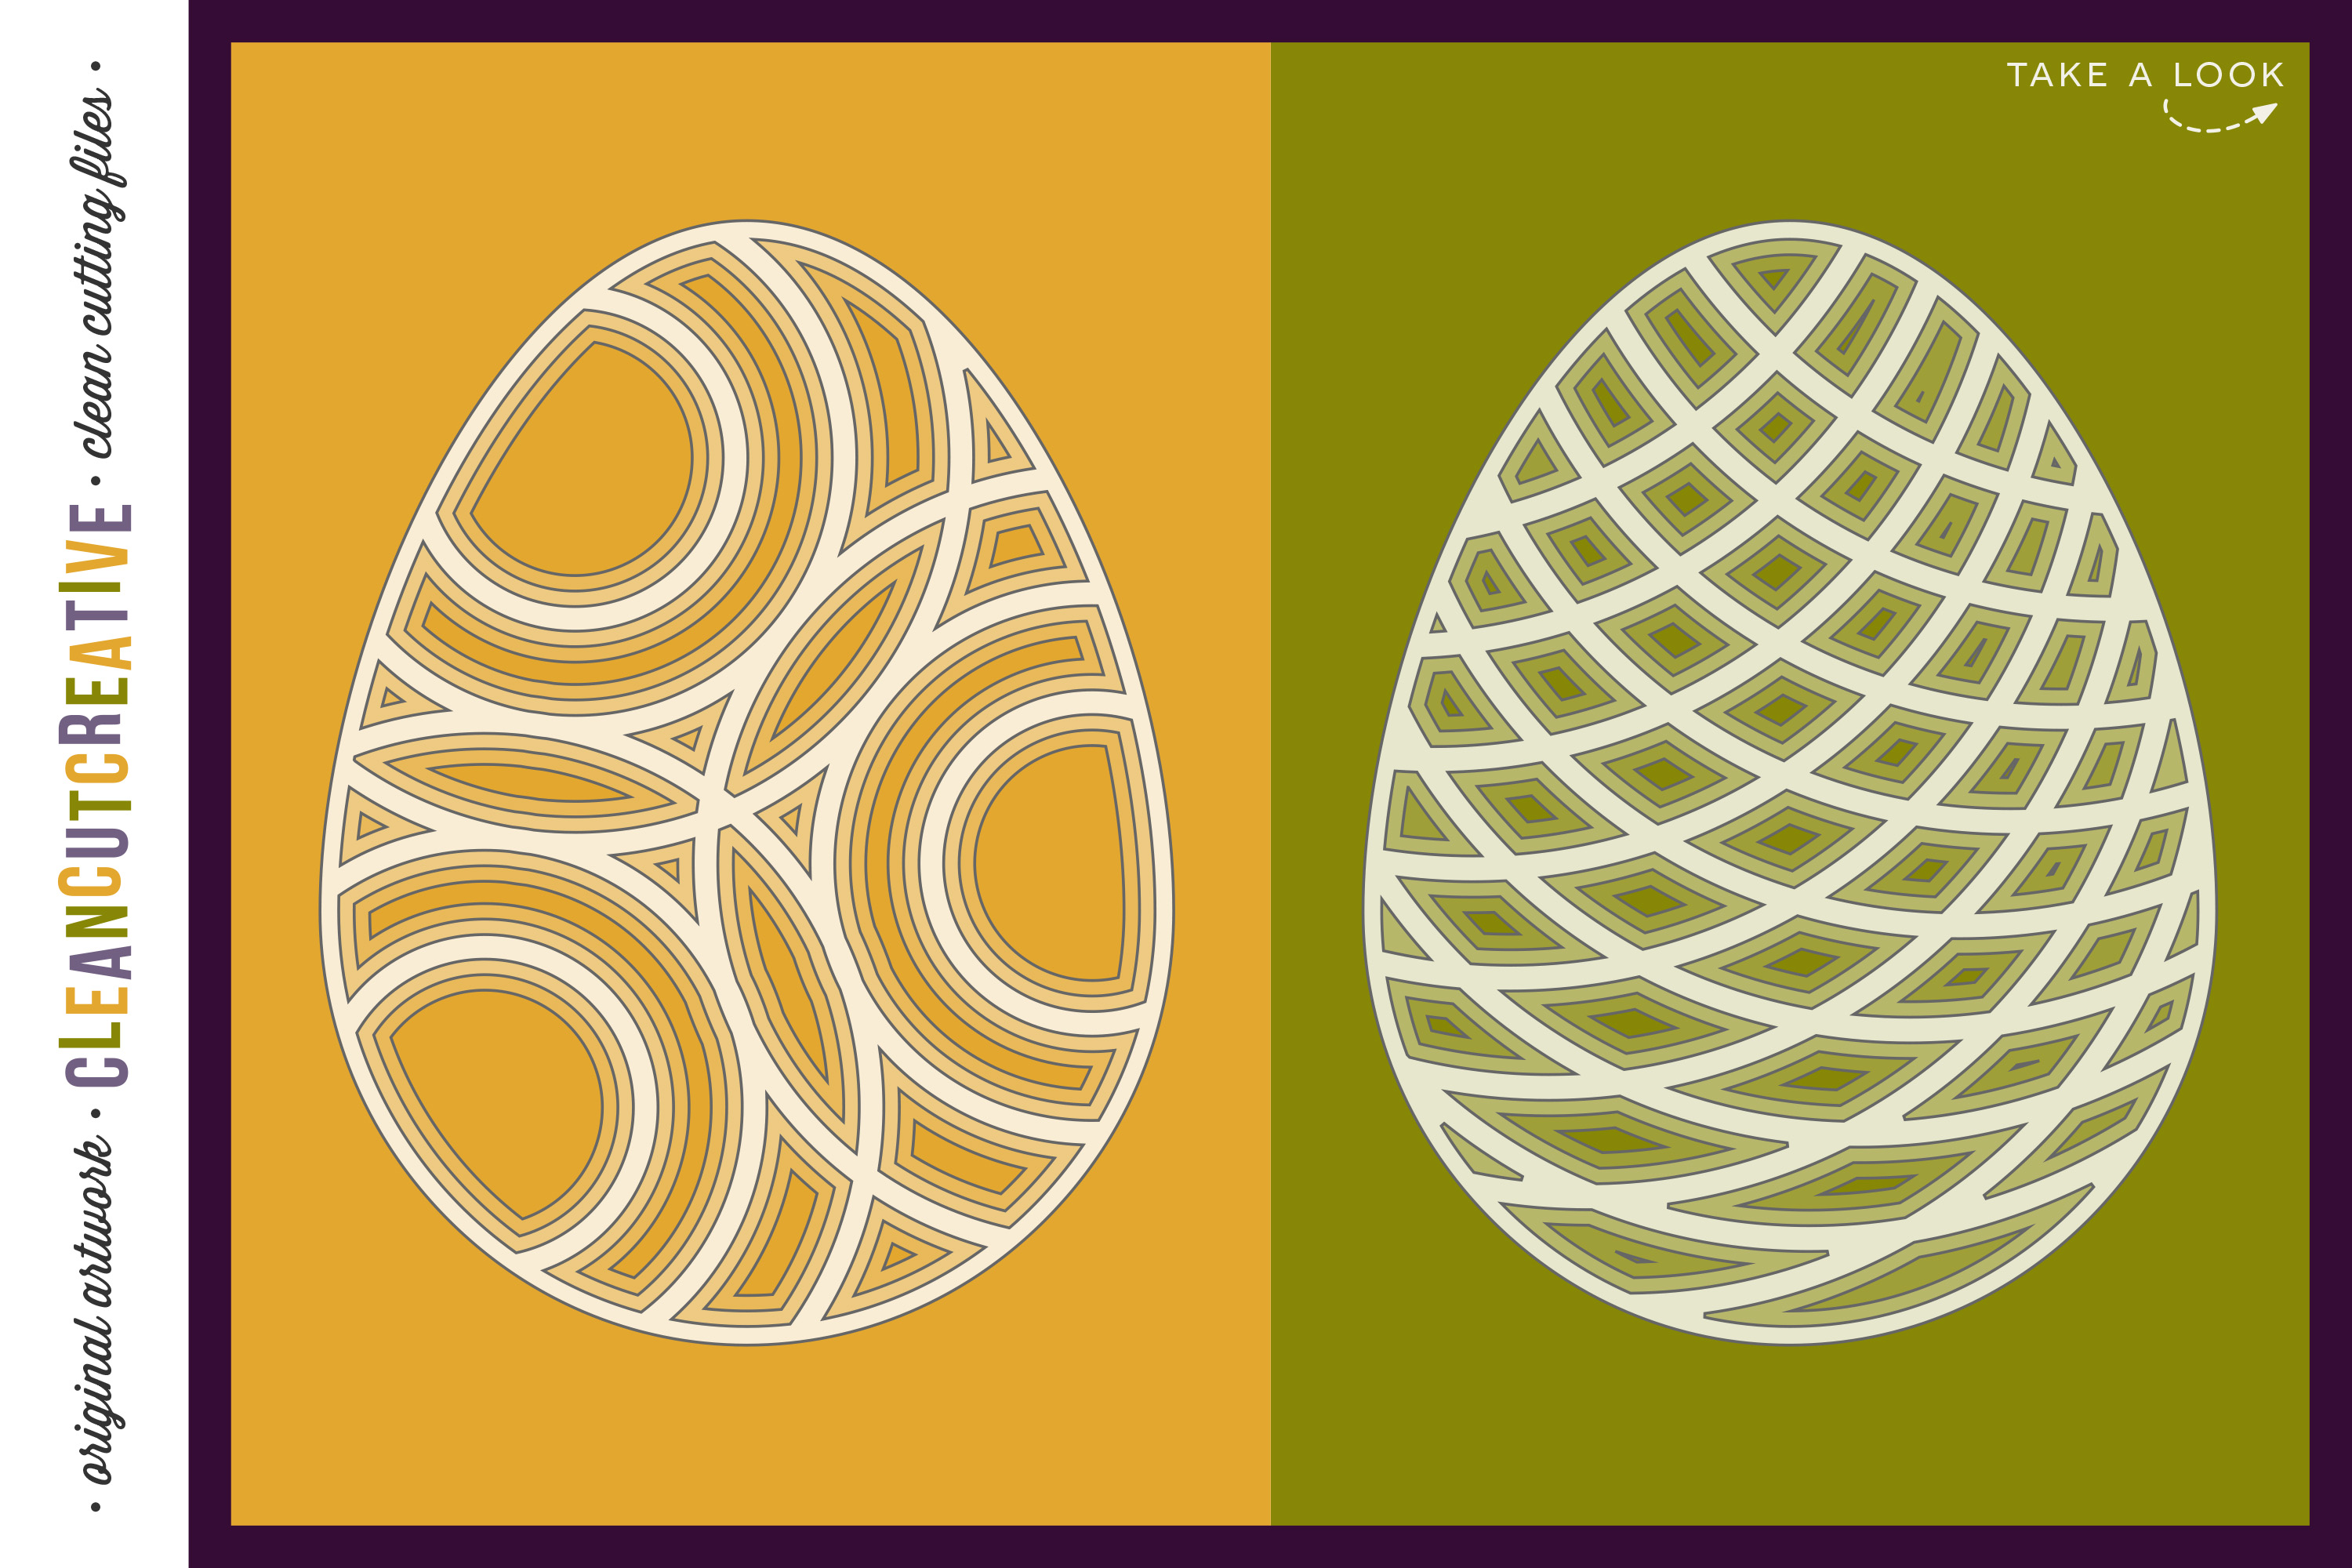 Download 3D layered EASTER EGG shadow boxes | stacked paper art SVG